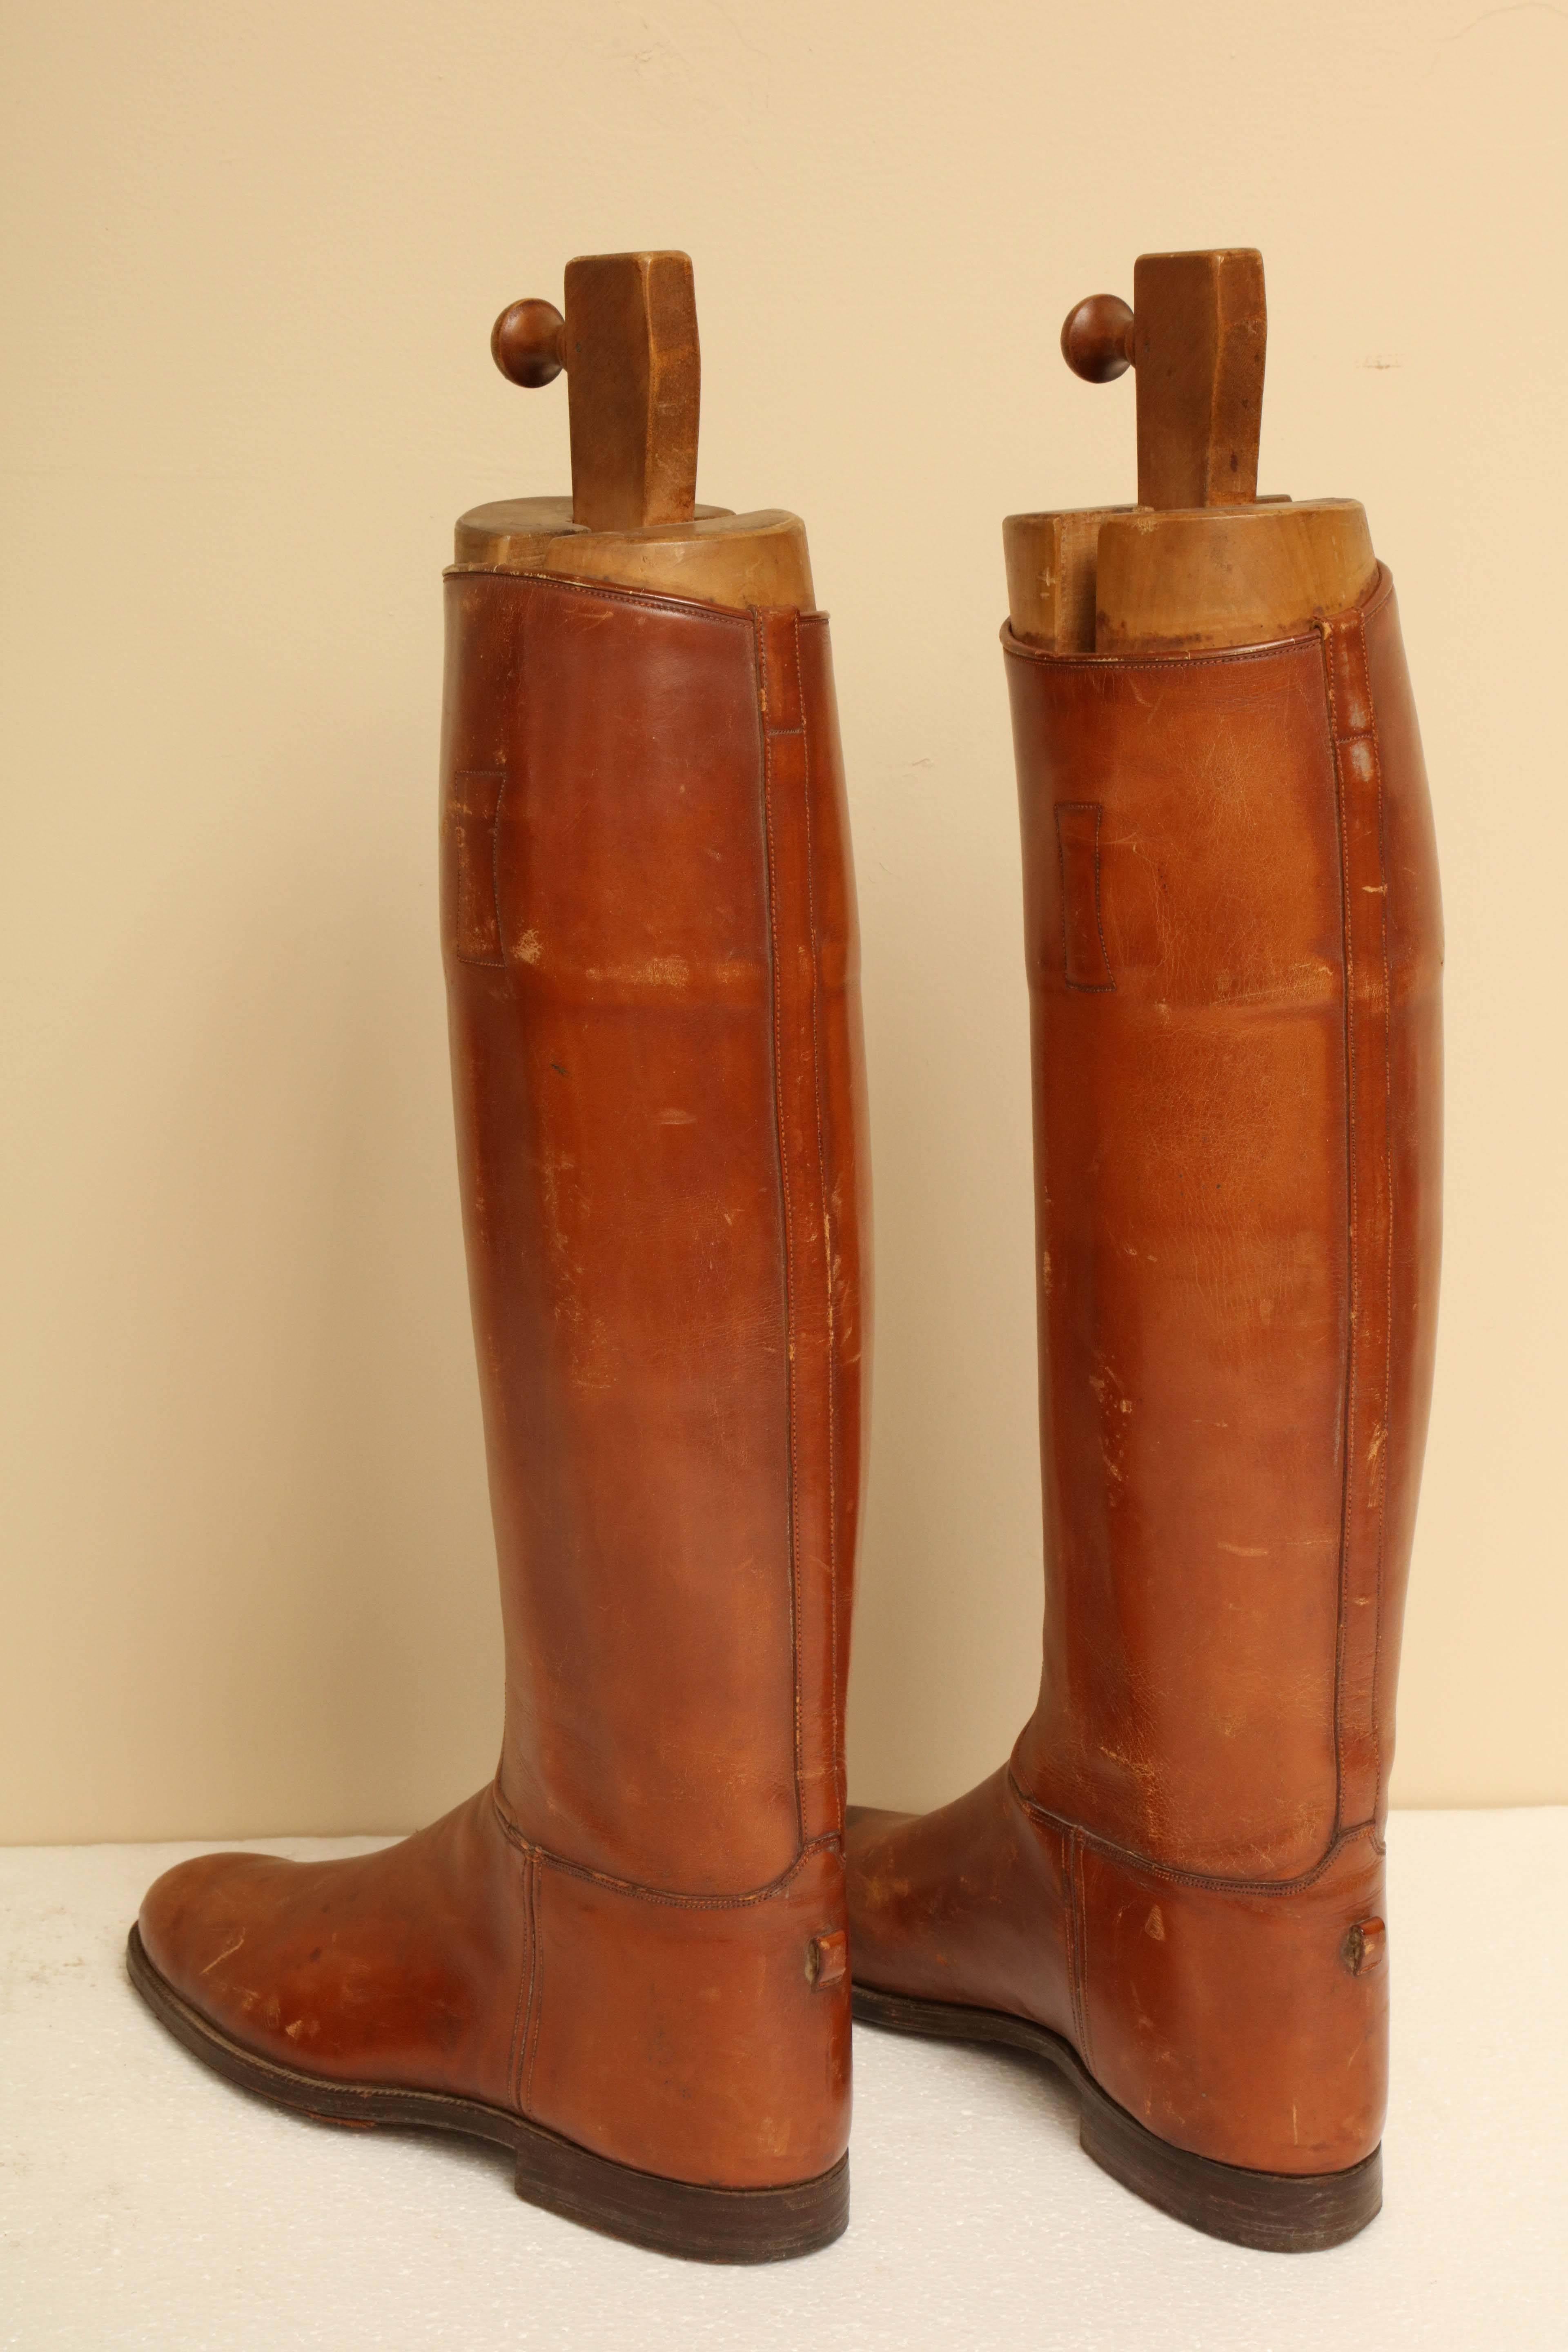 20th Century Pair of English Riding Boots with Custom Boot Trees